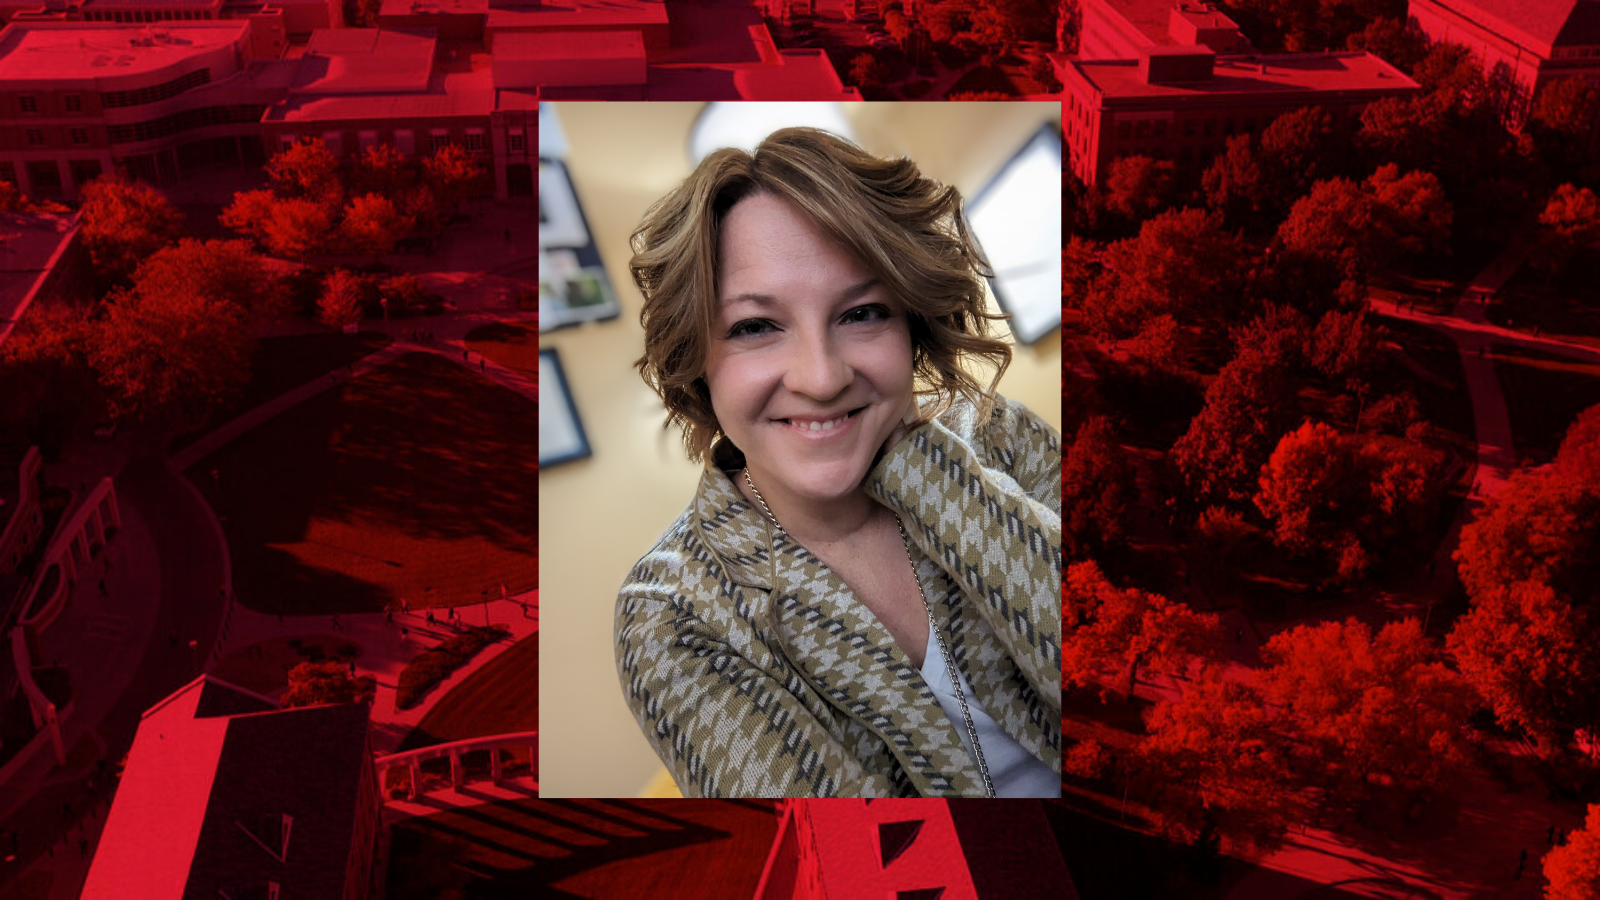 Professional headshot of Erin Pearson on a red background.